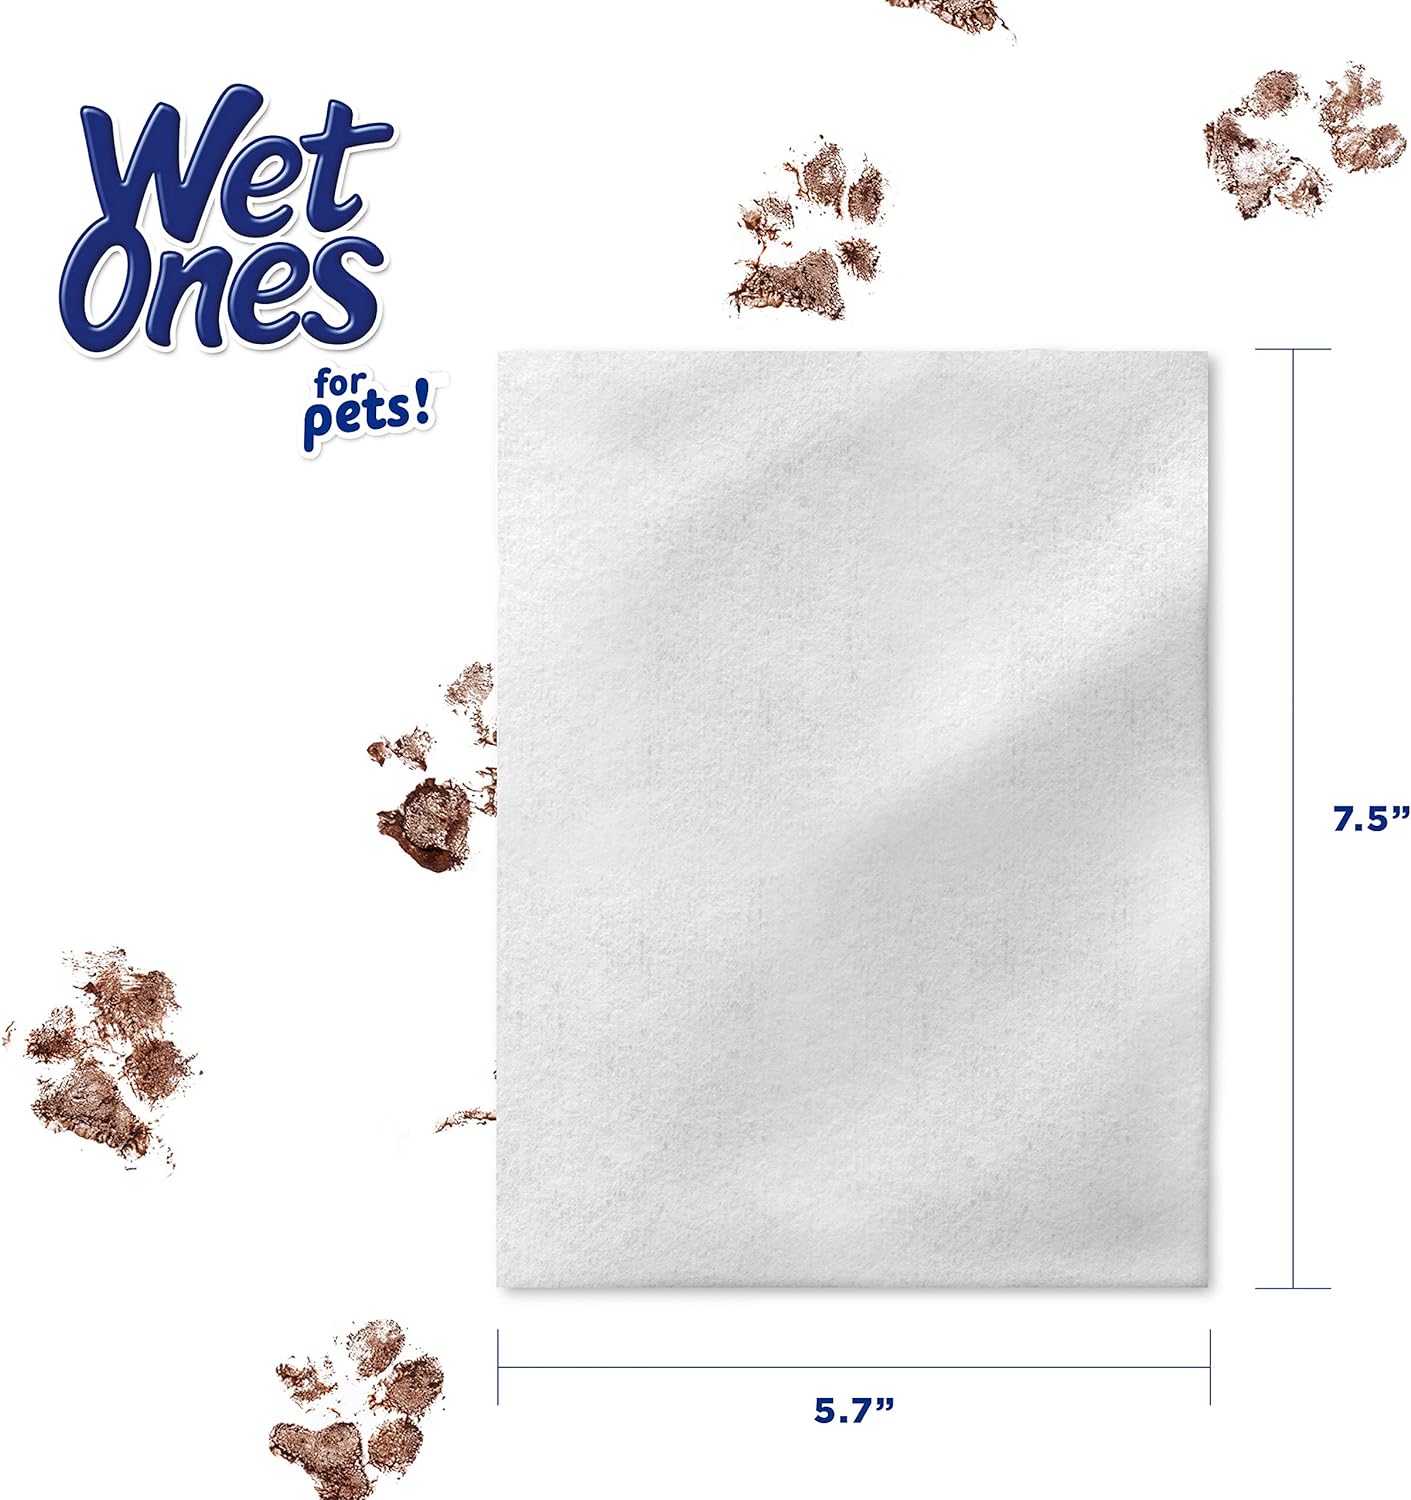 Wet Ones for Pets Deodorizing Multi-Purpose Dog Wipes With Baking Soda, 100 ct - 12 Pack | Dog Deodorizing Wipes For All Dogs in Tropical Splash Scent, Wet Ones Wipes for Deodorizing Dogs